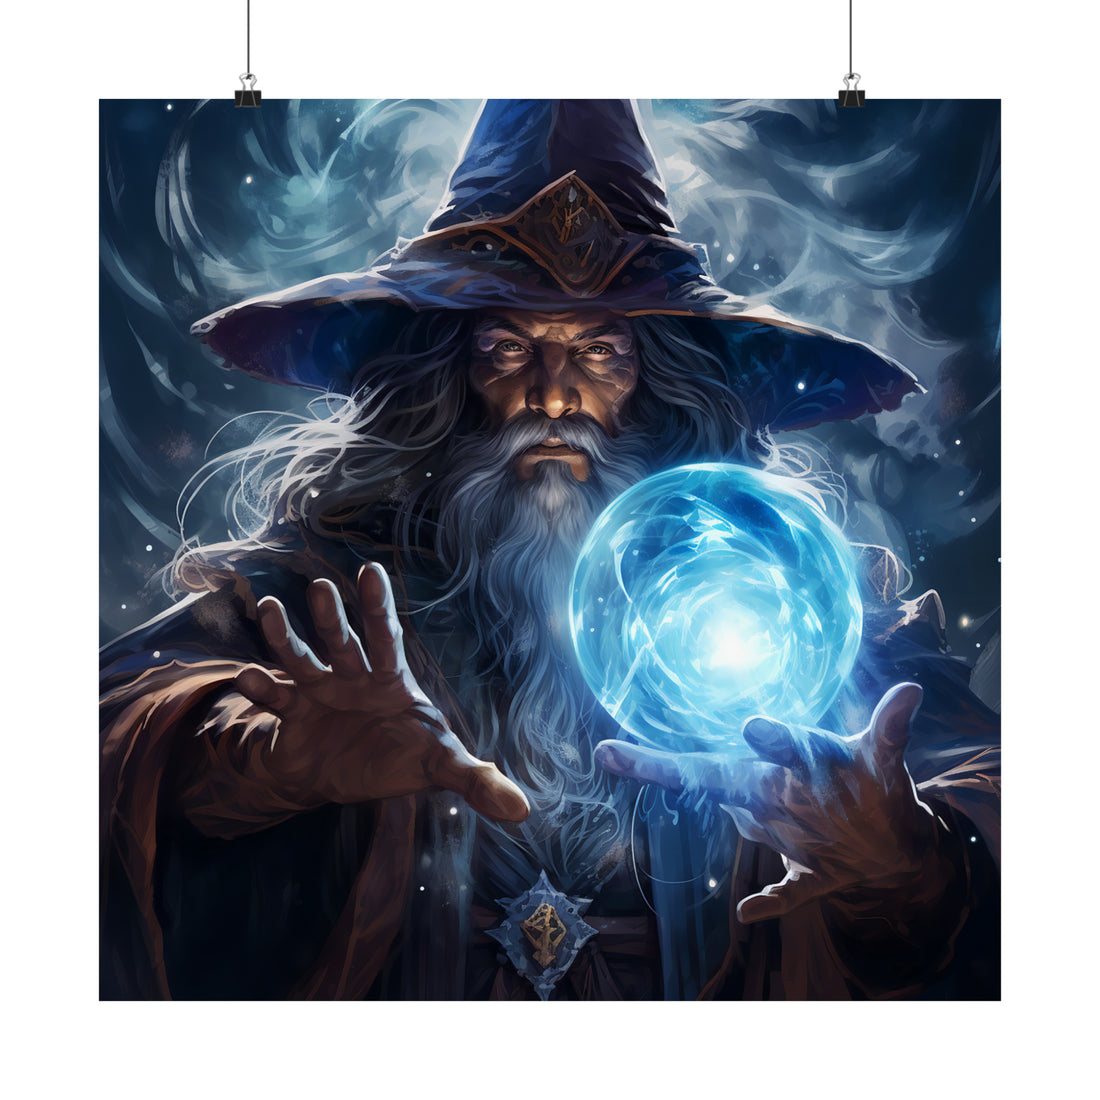 The Magnificent Wizard